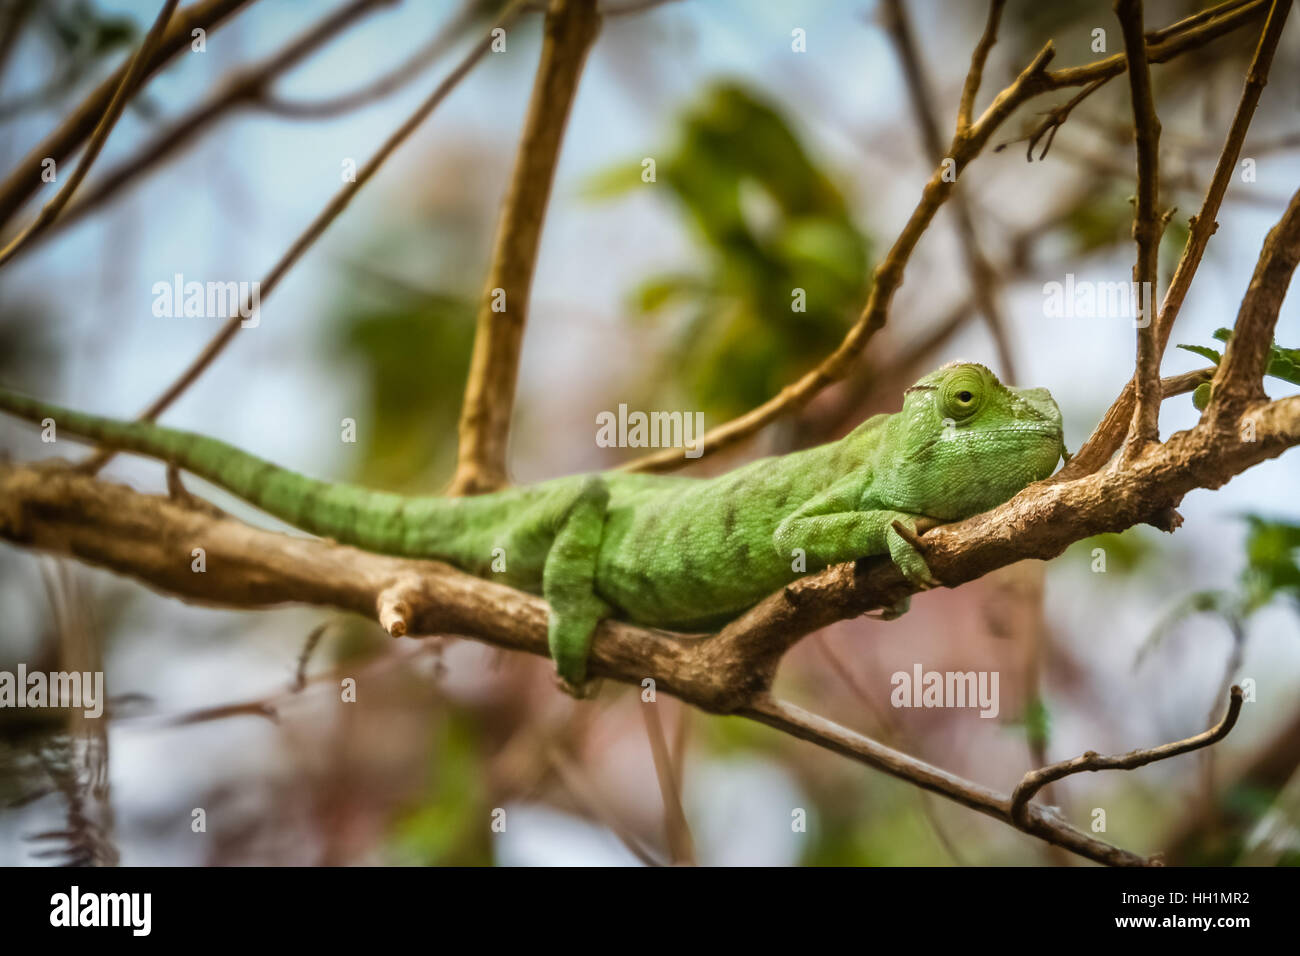 Chameleon catching sun on the small branch, Madagascar Stock Photo